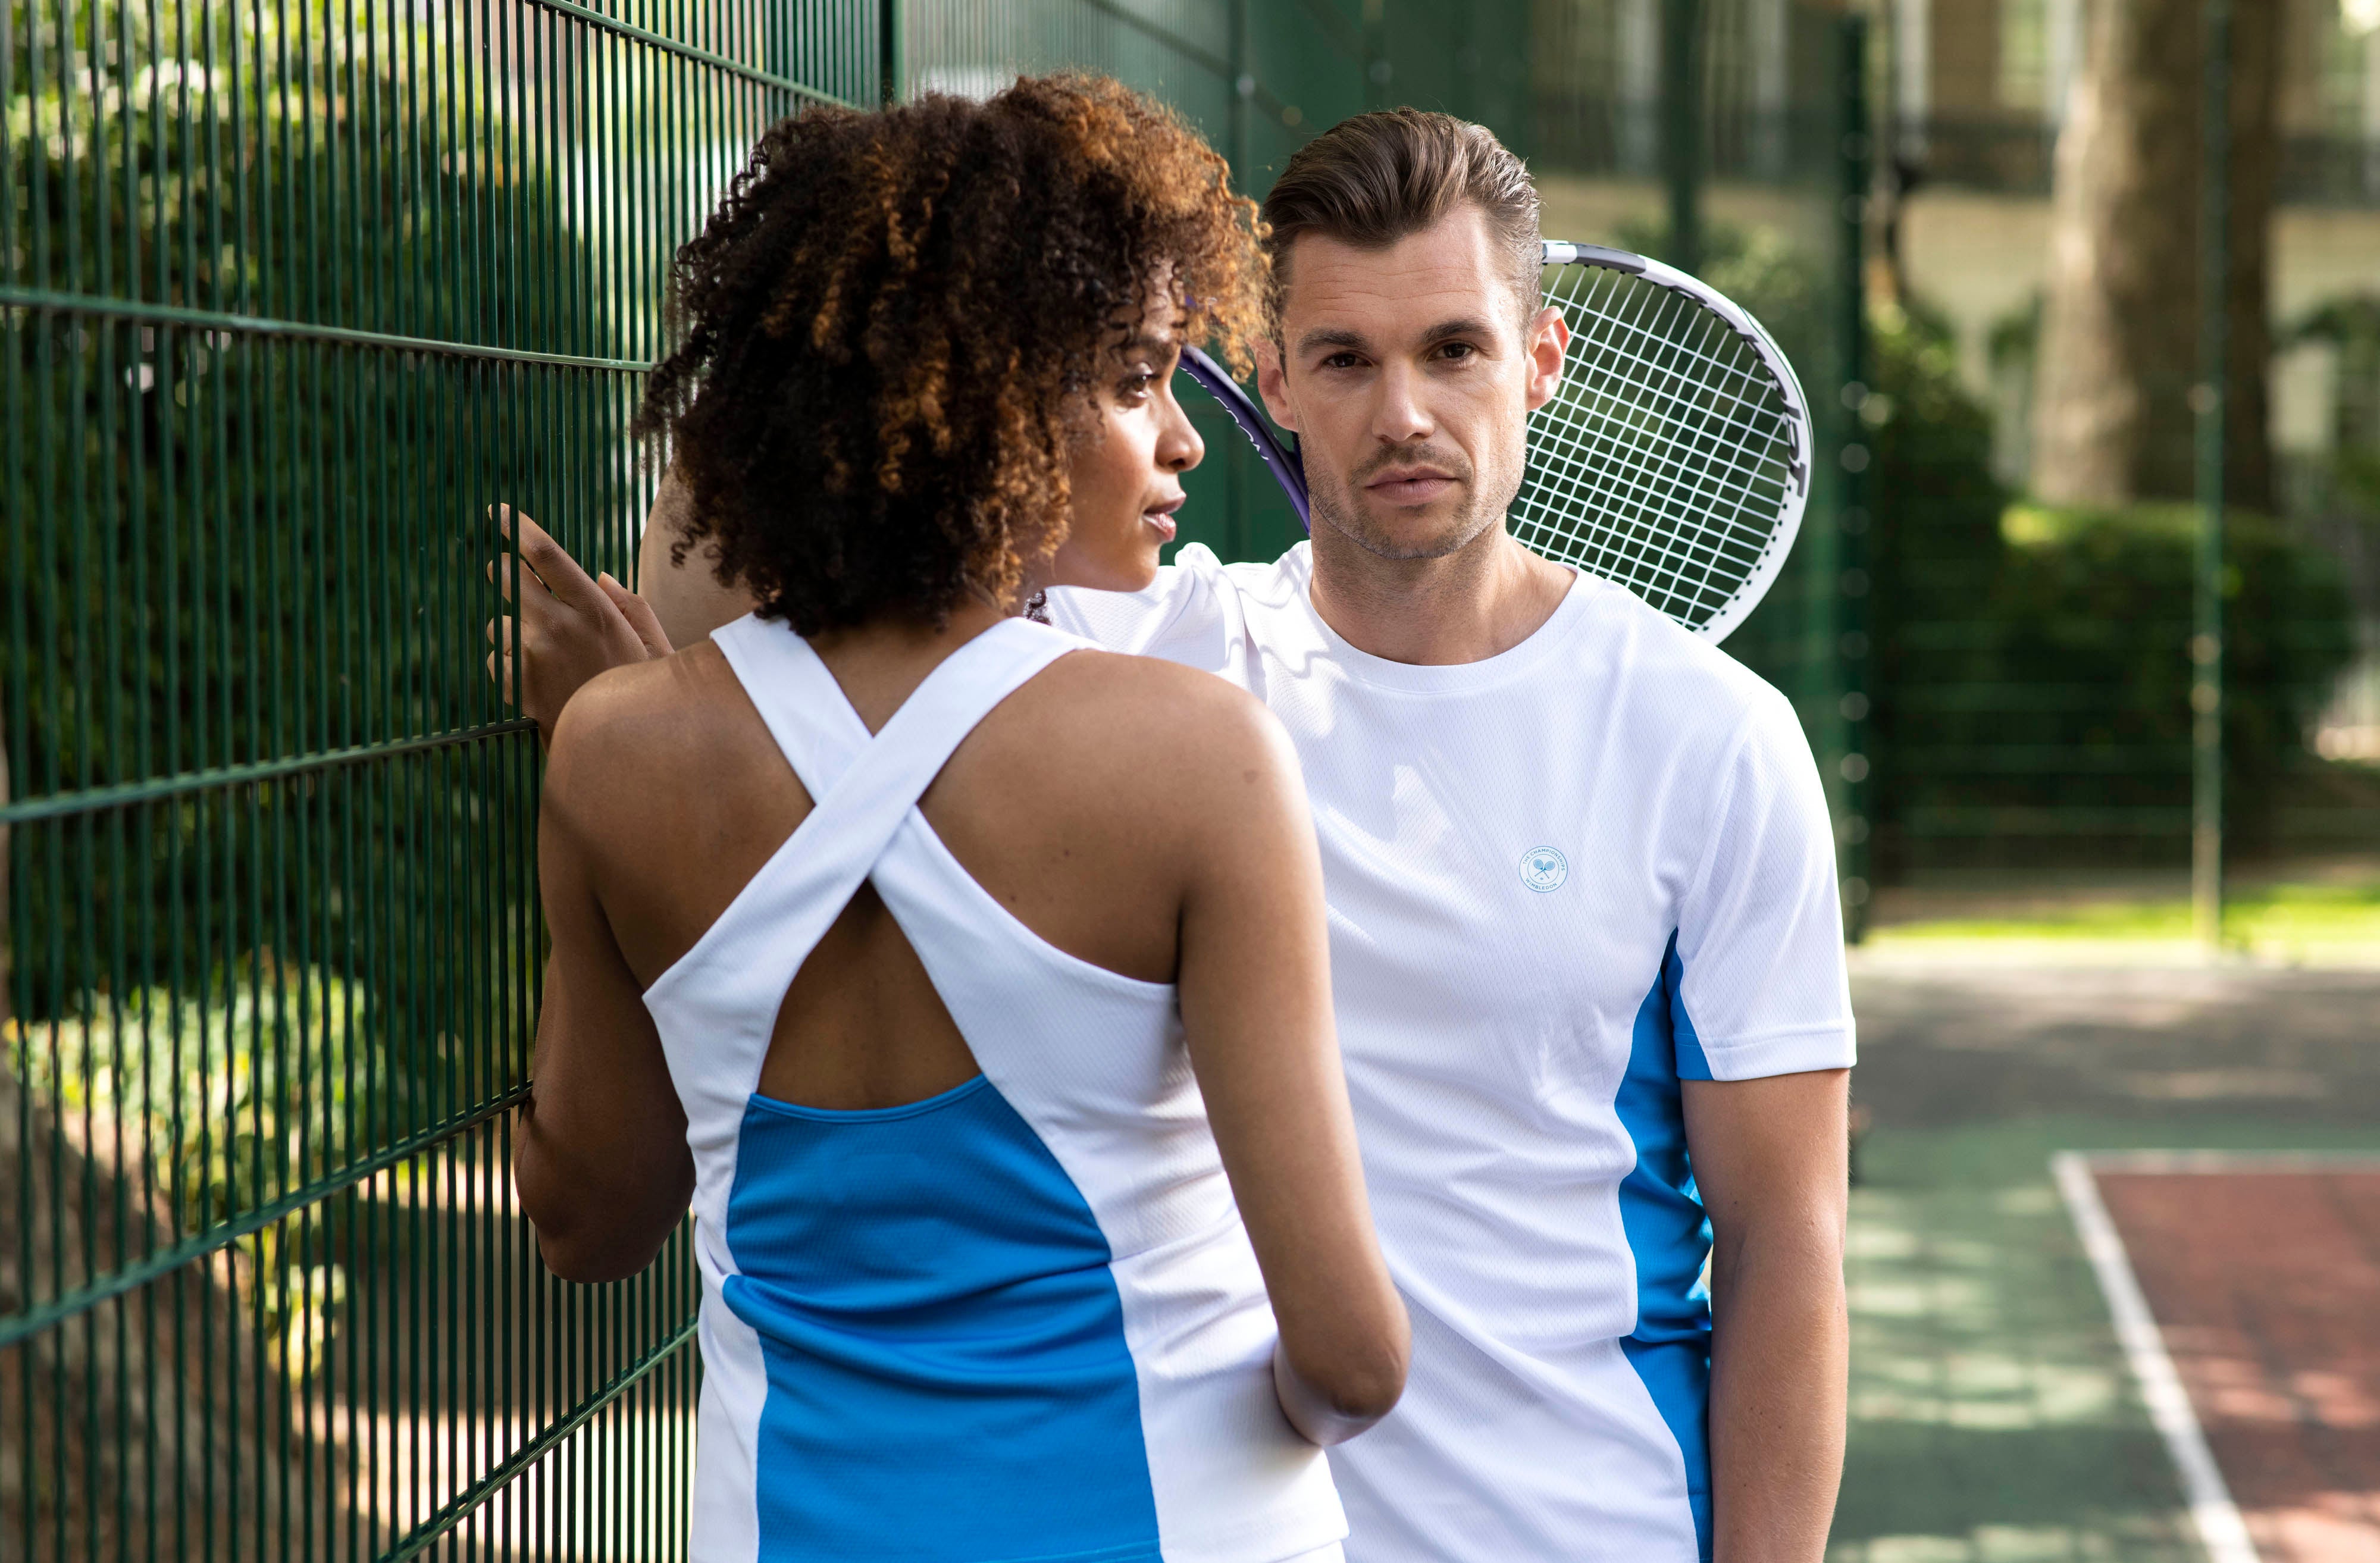 Models pose in the 'Wimbledon Collection', a new premium leisure and performance wear line created by The All England Lawn Tennis Club (AELTC) and designed in-house just steps away from Centre Court in SW19, London